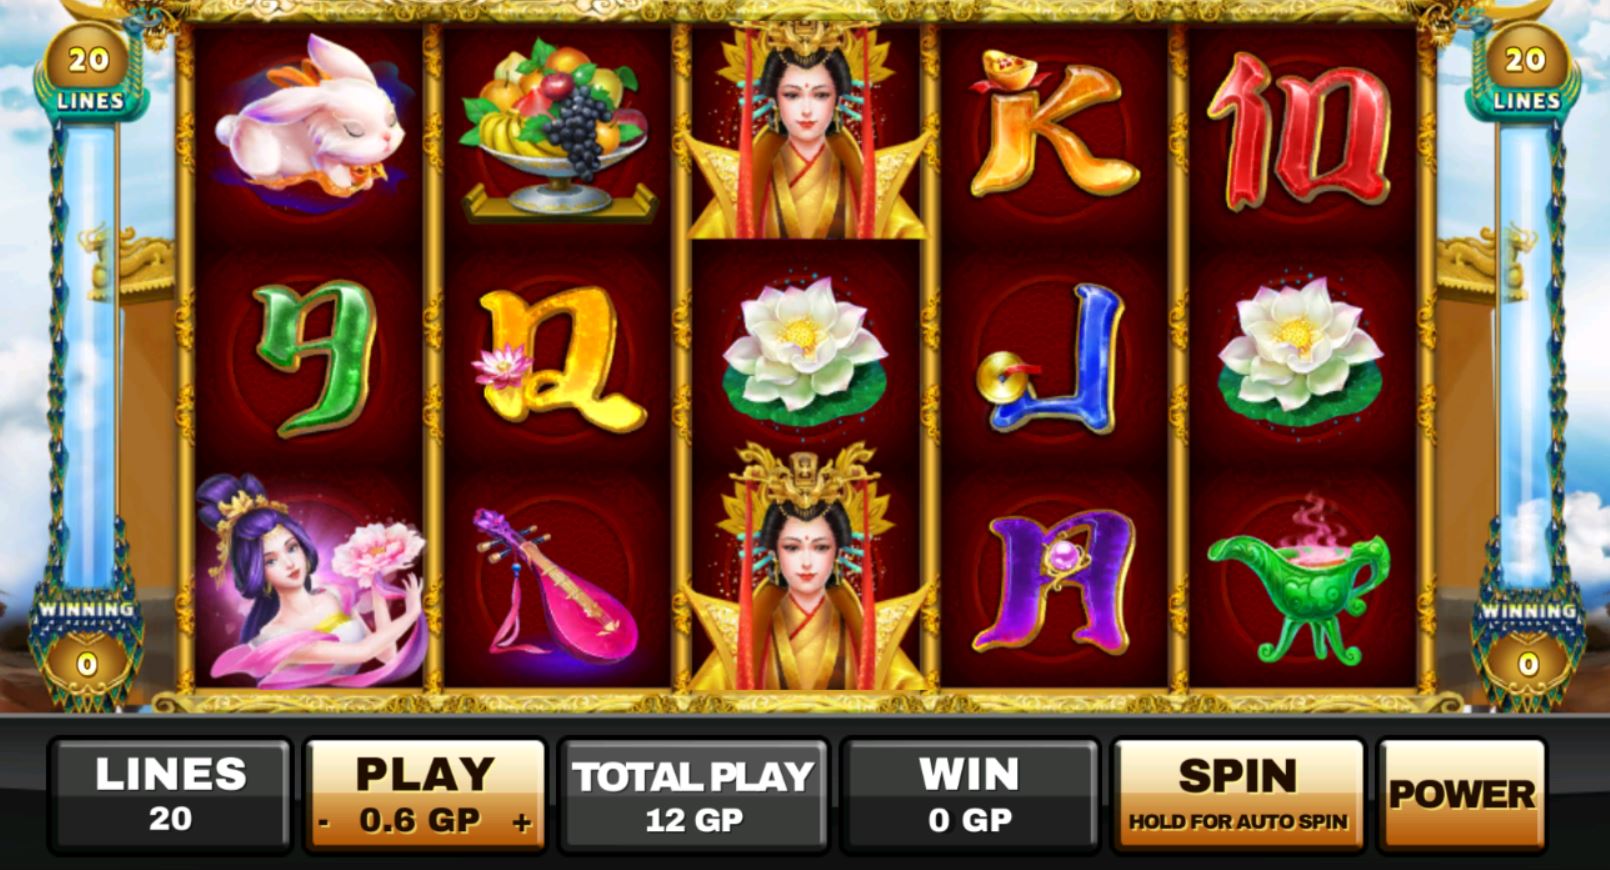 Jelly bean casino 30 free spins